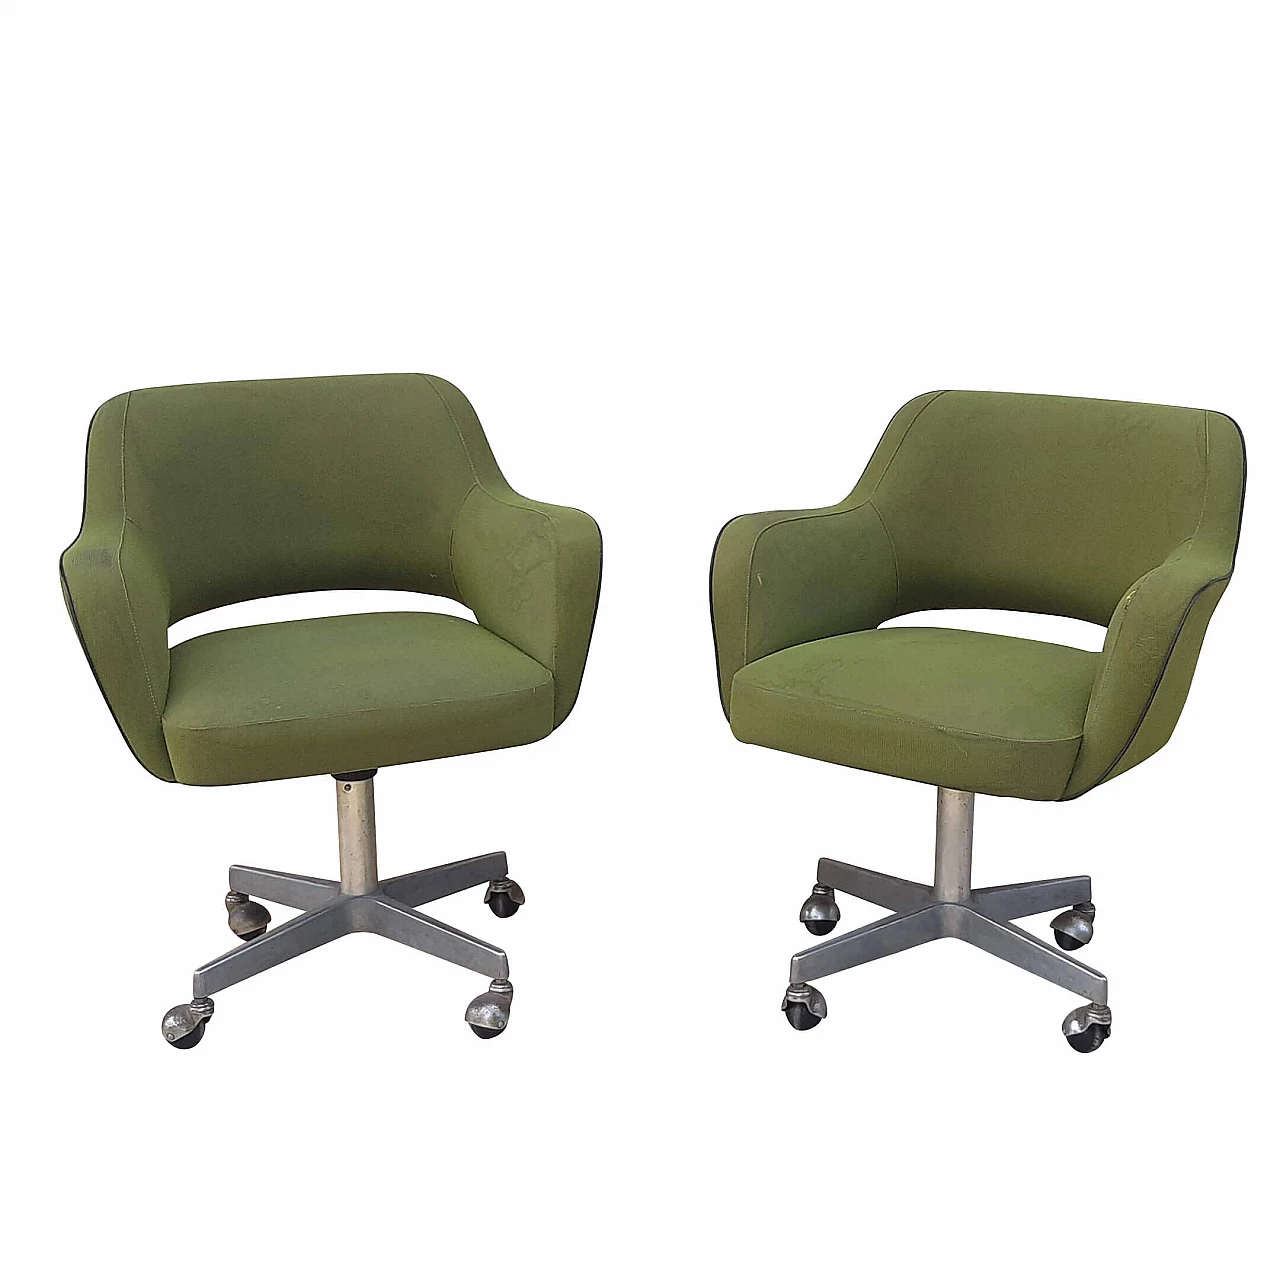 Swivel armchair by Mobiltecnica, 60s, 4 available 1340326